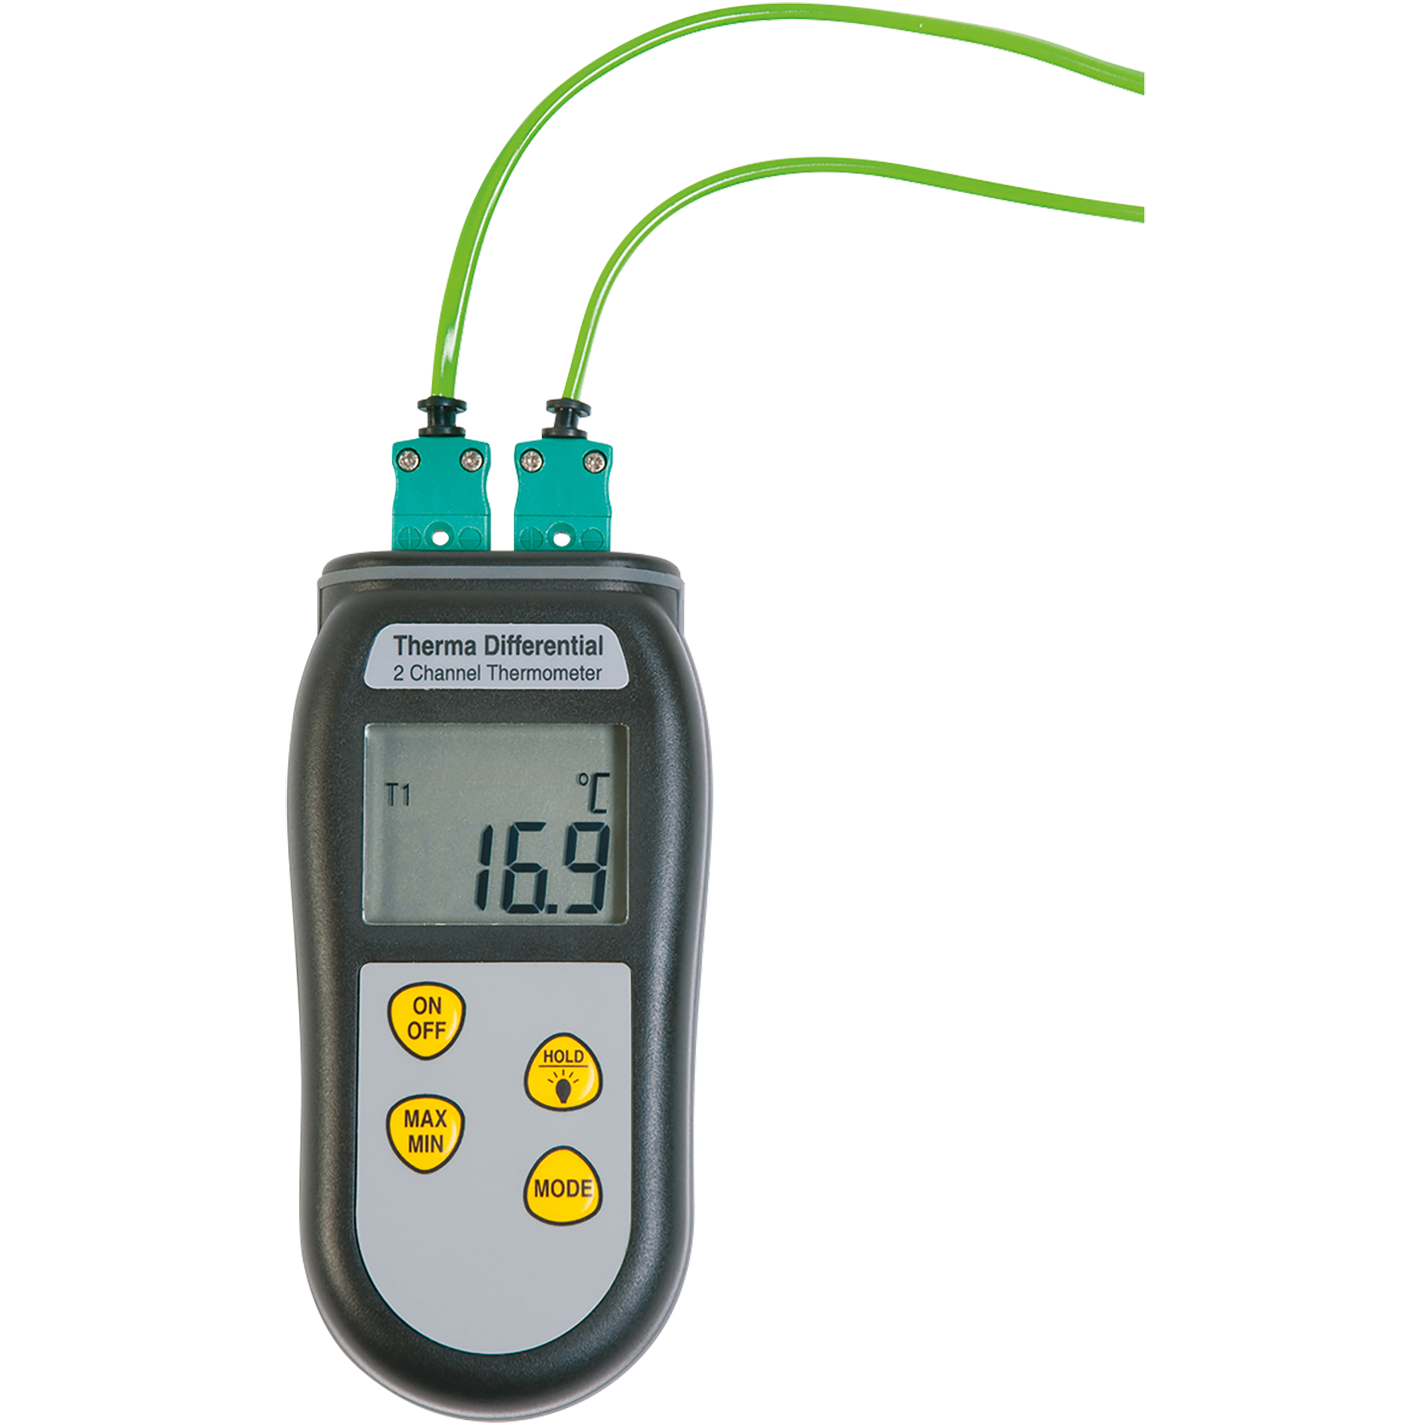 THERMA DIFF THERMOMETER 2 CHANNEL K TYPE